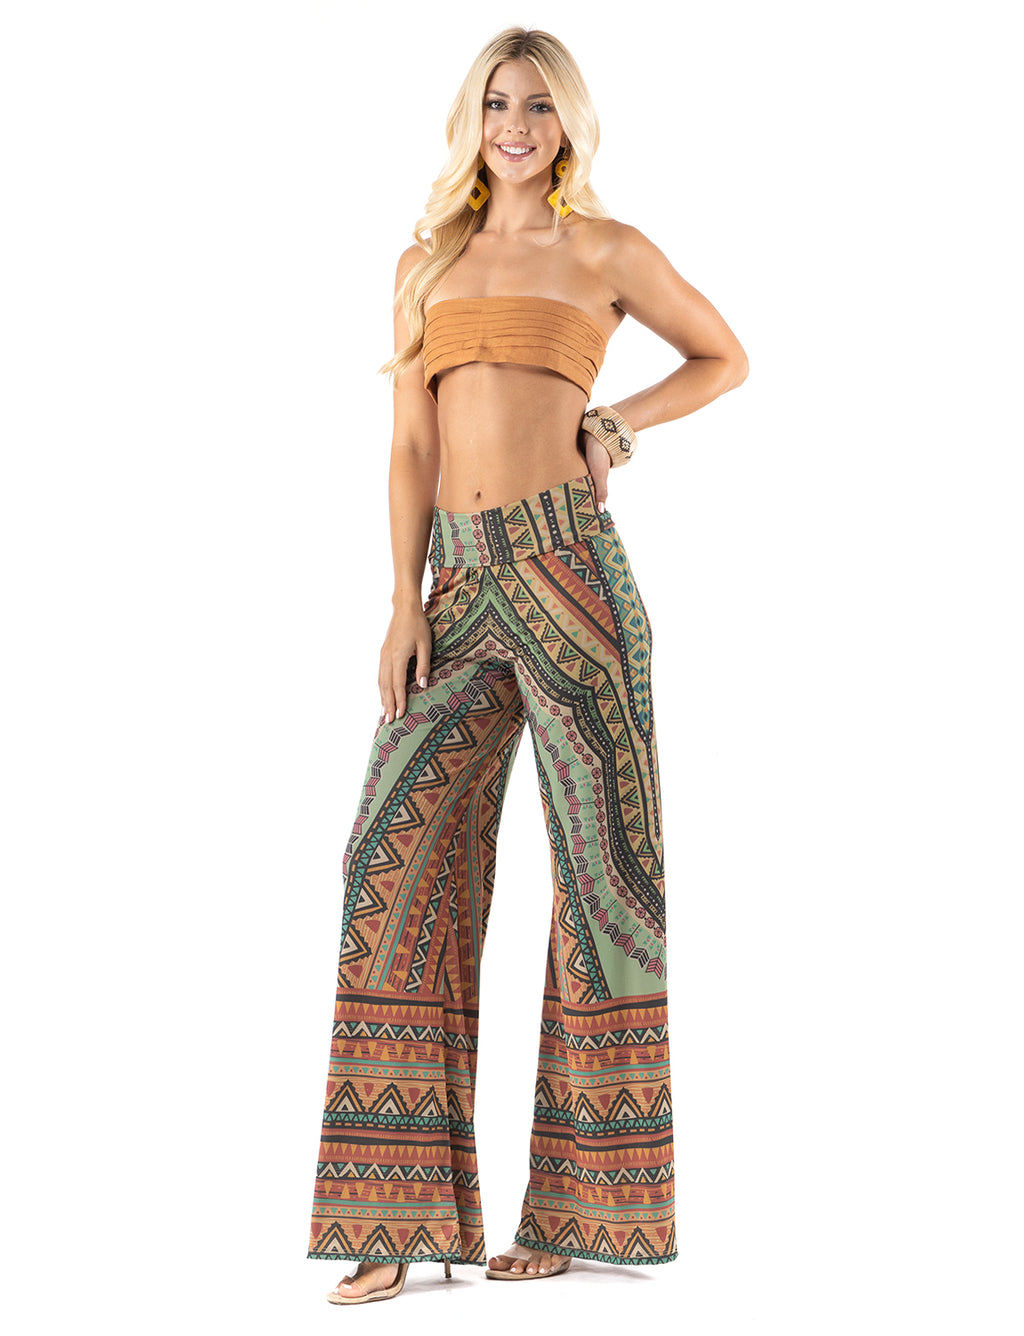 Beautiful woman wearing this amazing Multi color Bohemian Style High waist palazzo pants featuring pockets, wide legs, and a comfortable stretchy fabric 